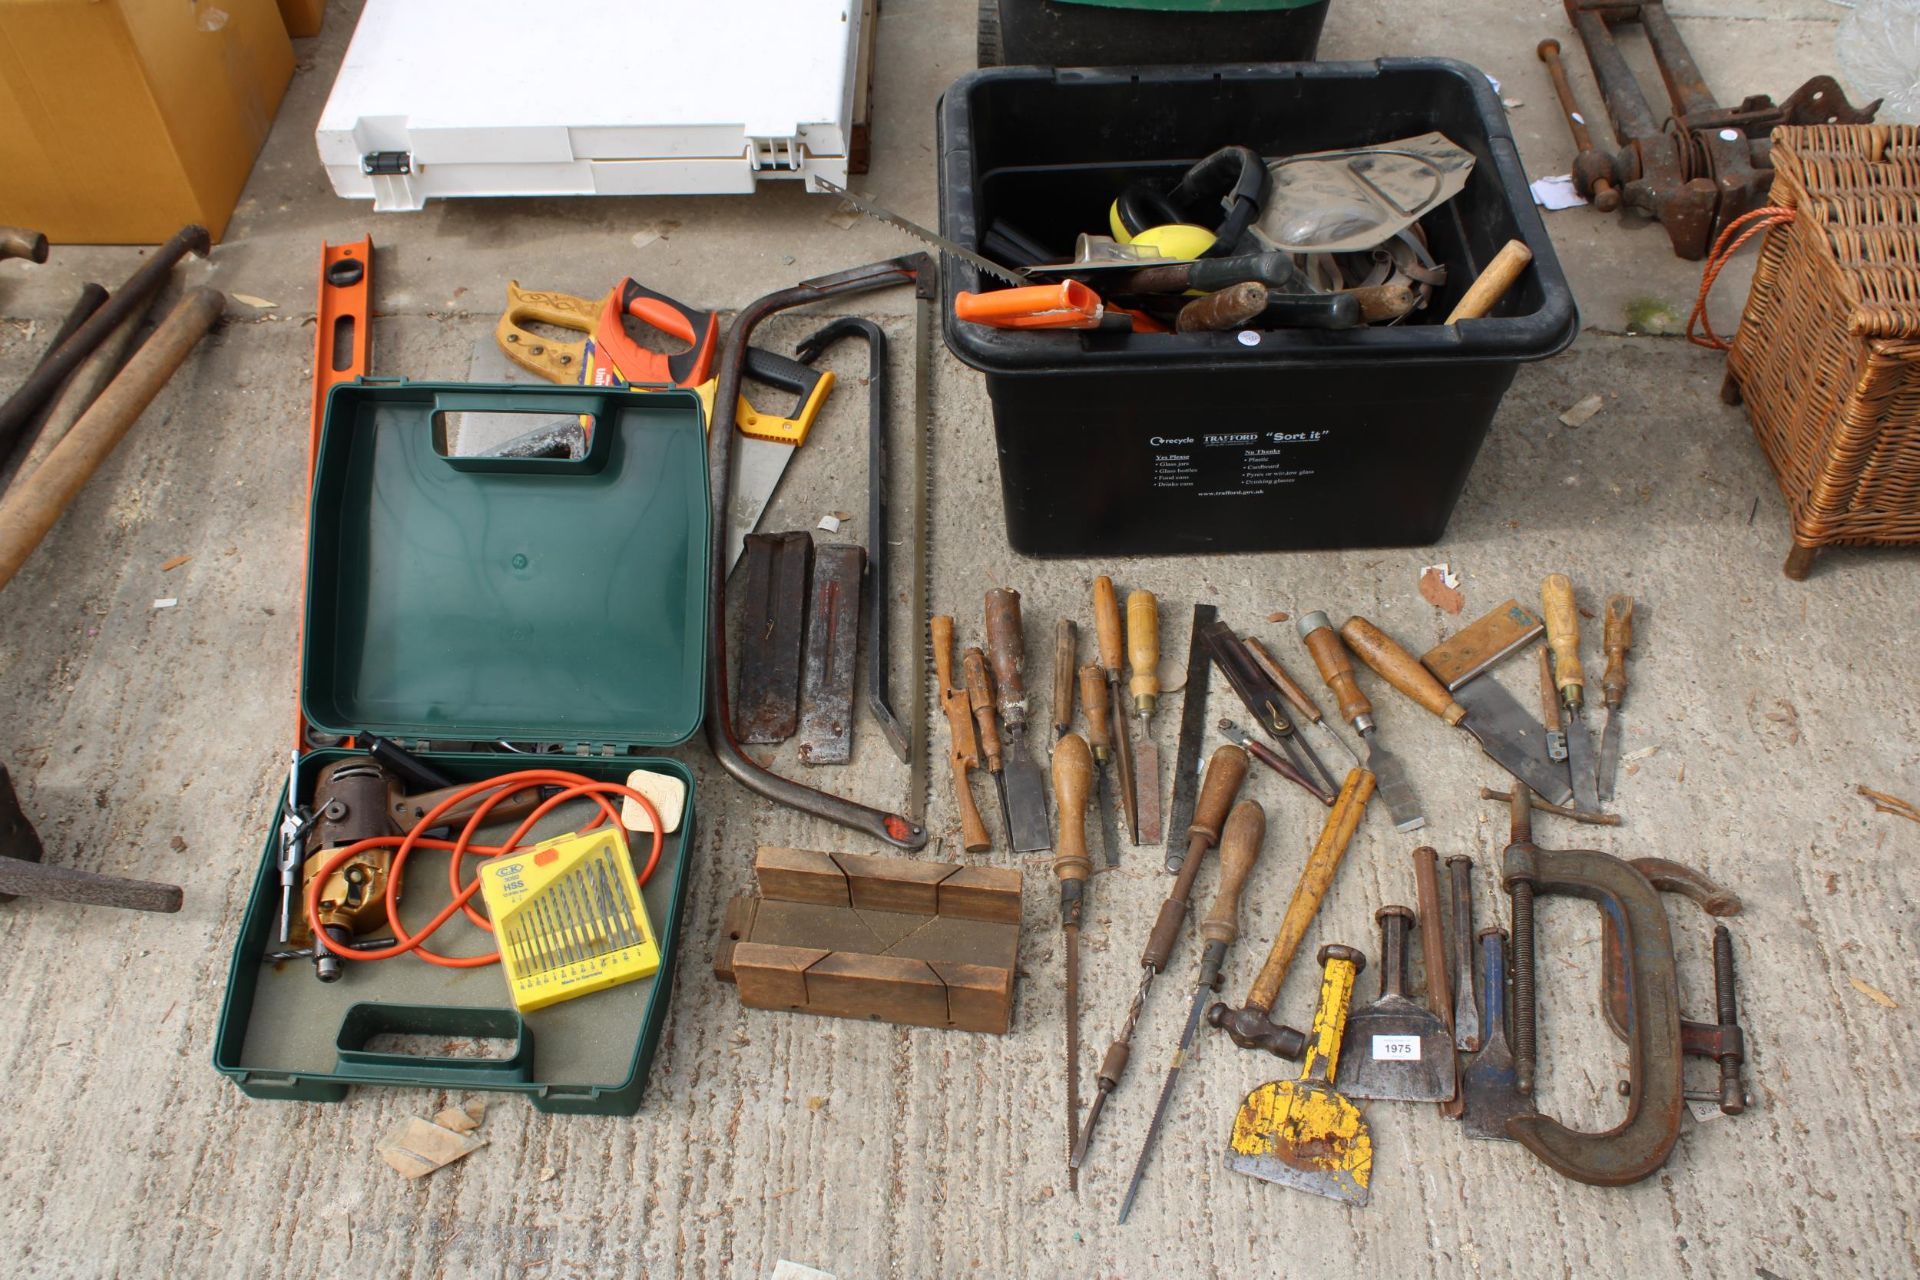 AN ASSORTMENT OF TOOLS TO INCLUDE G CLAMPS, CHISELS AND SAWS ETC